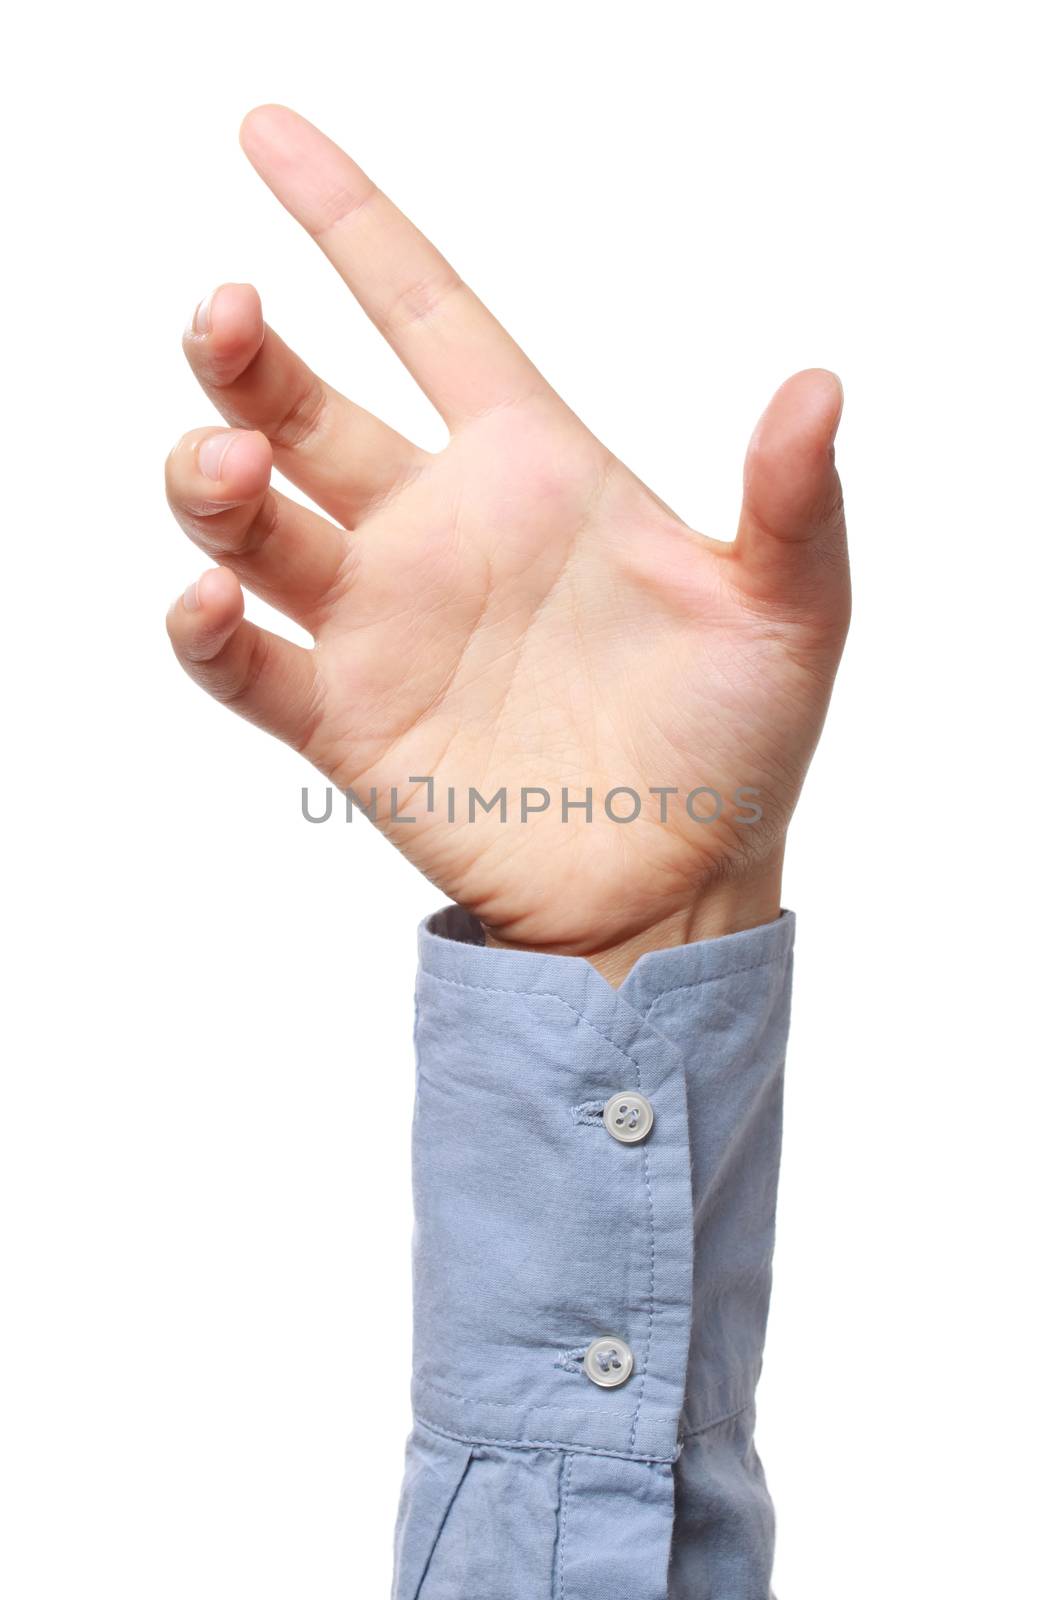 Hand positioned to hold a product isolated on white